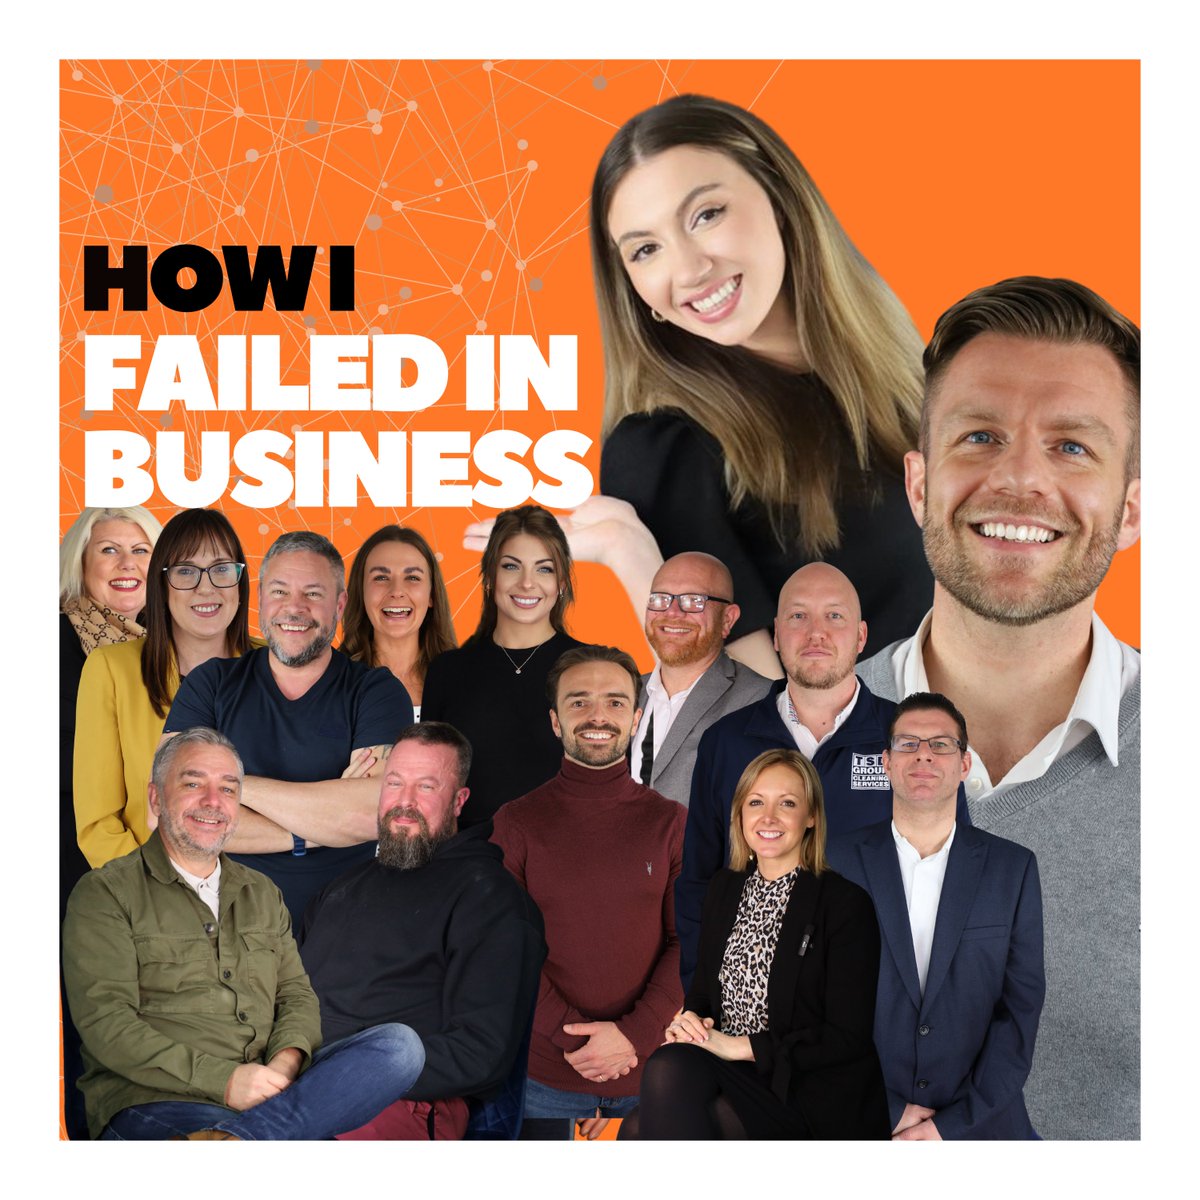 We have had some incredible guests on the How I Failed in Business Podcast so far - and I would love to have YOU next! The How I Failed in Business Podcast is a hilarious look at business, entrepreneurship and careers. Fancy sharing your story? Be sure to send me a message!